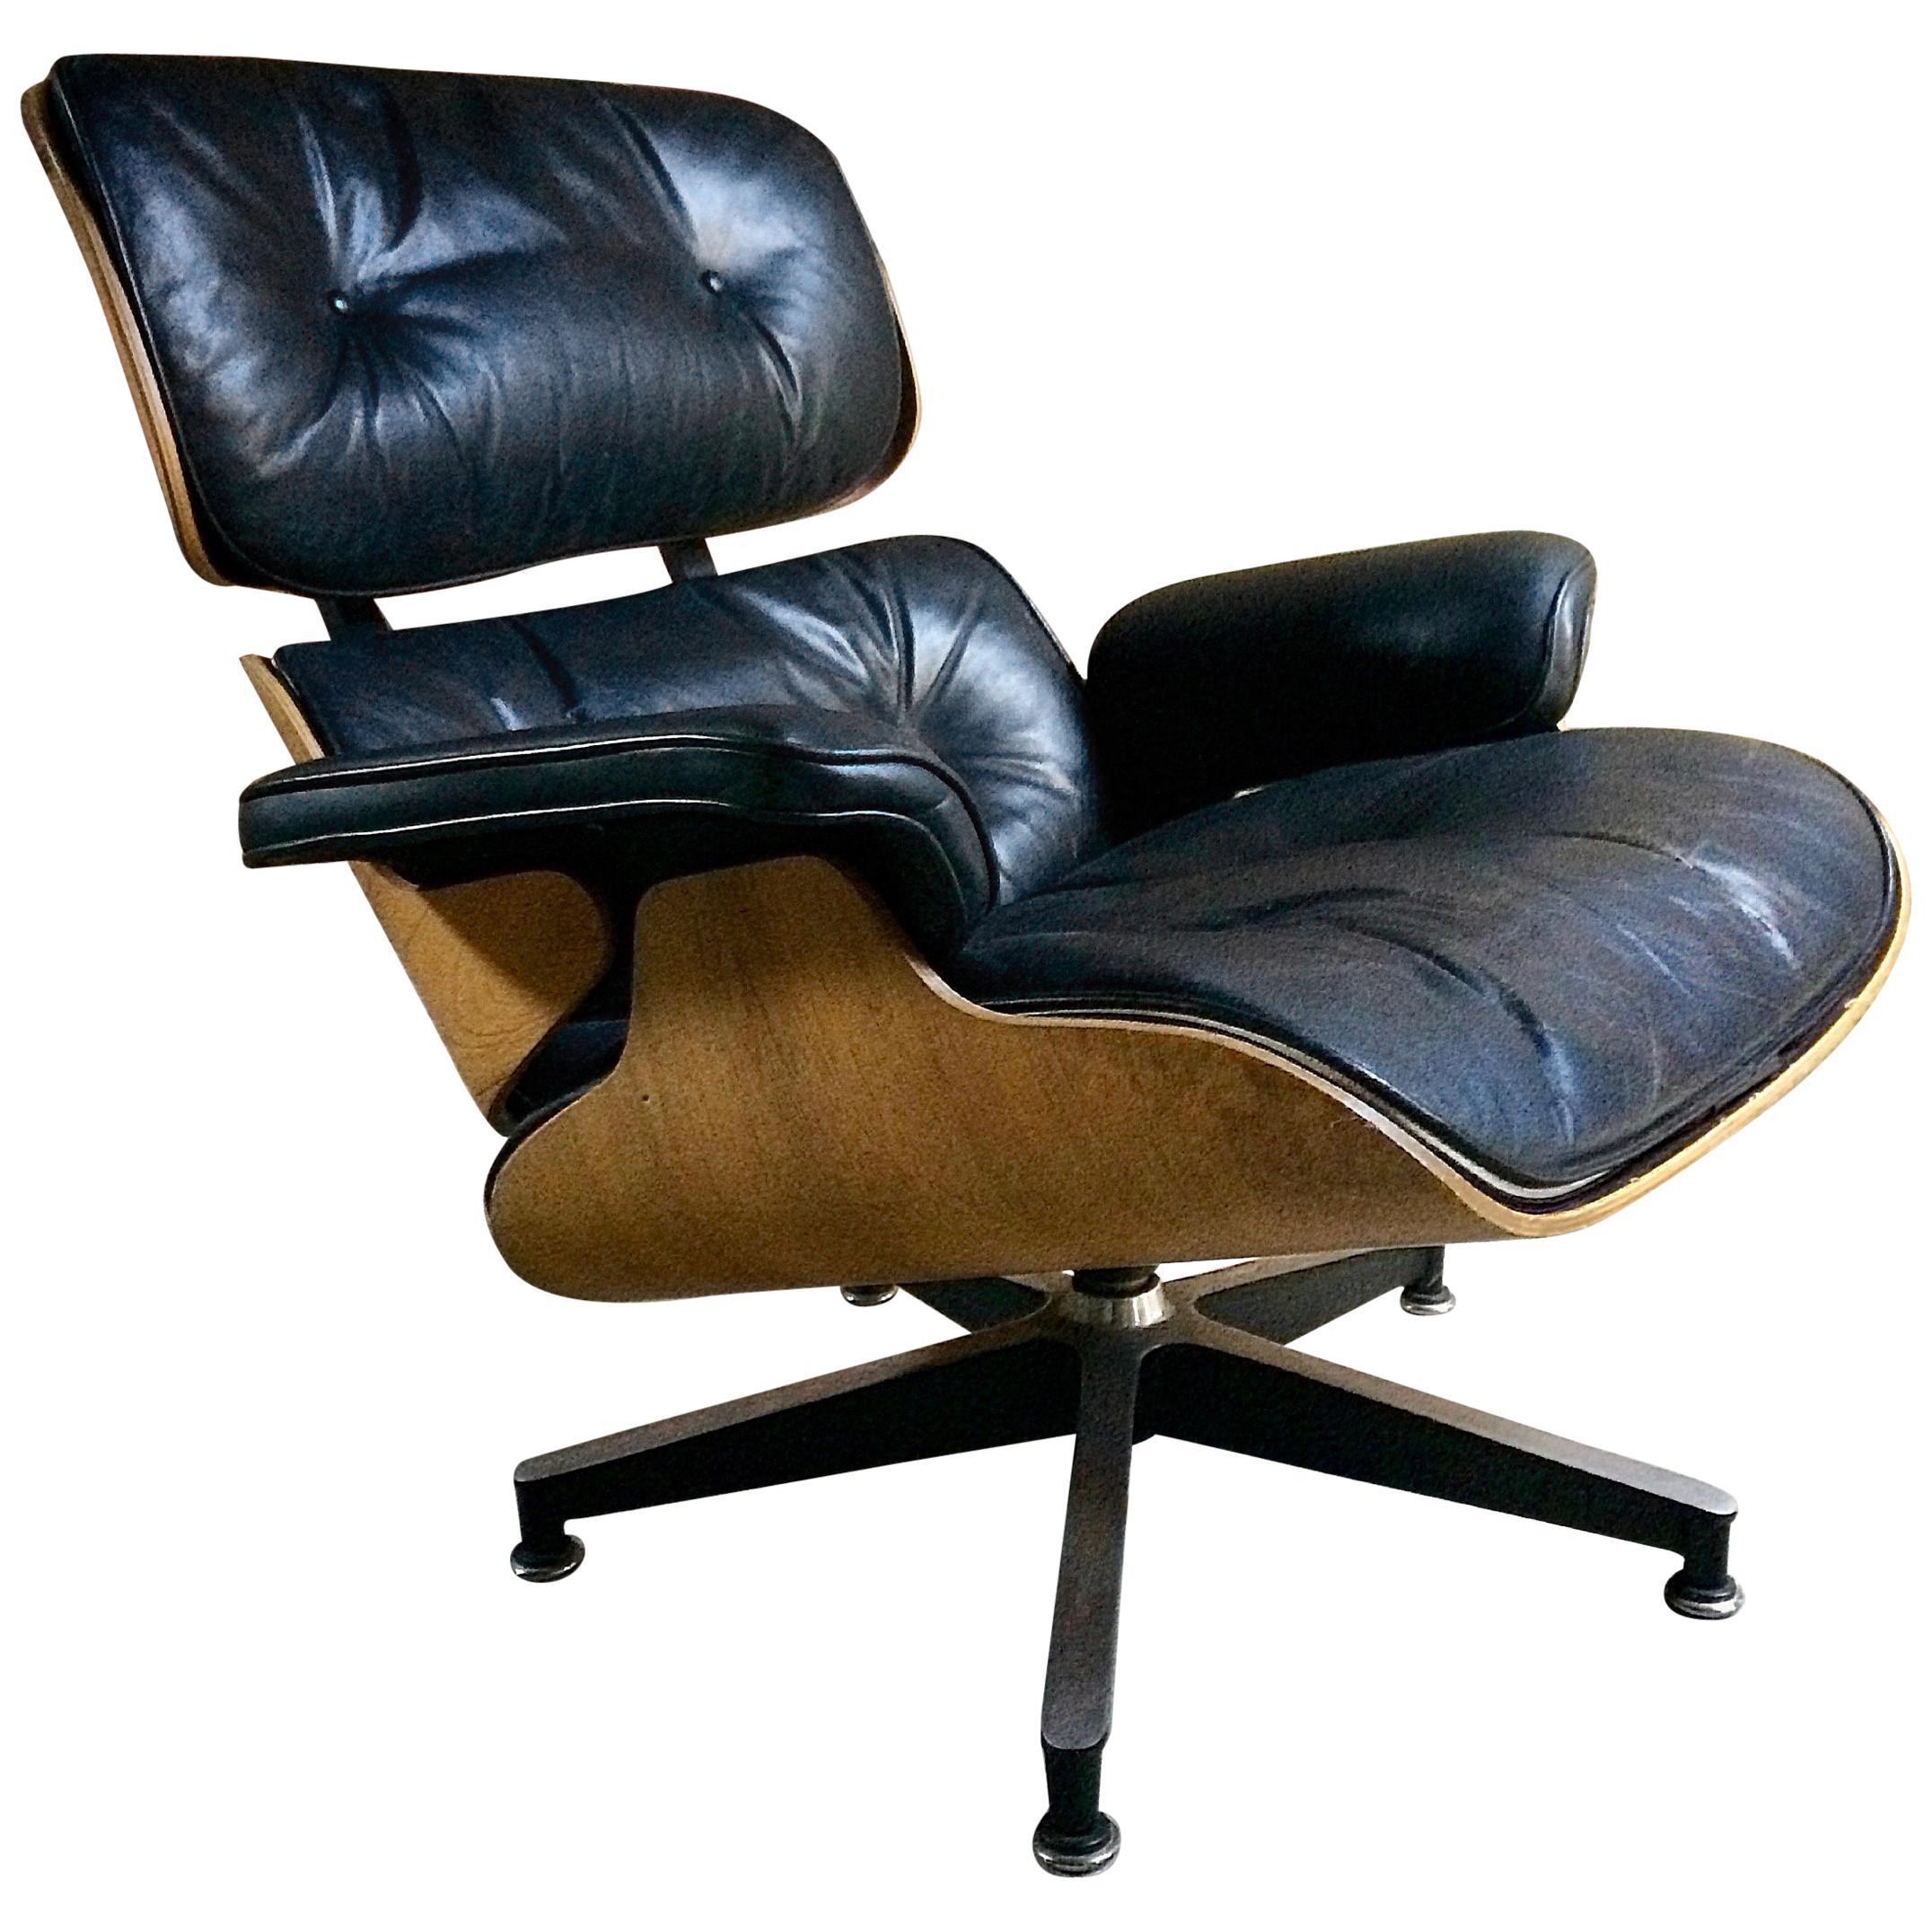 Original Charles and Ray Eames Lounge Chair Model 670 by Herman Miller,  1970s at 1stDibs